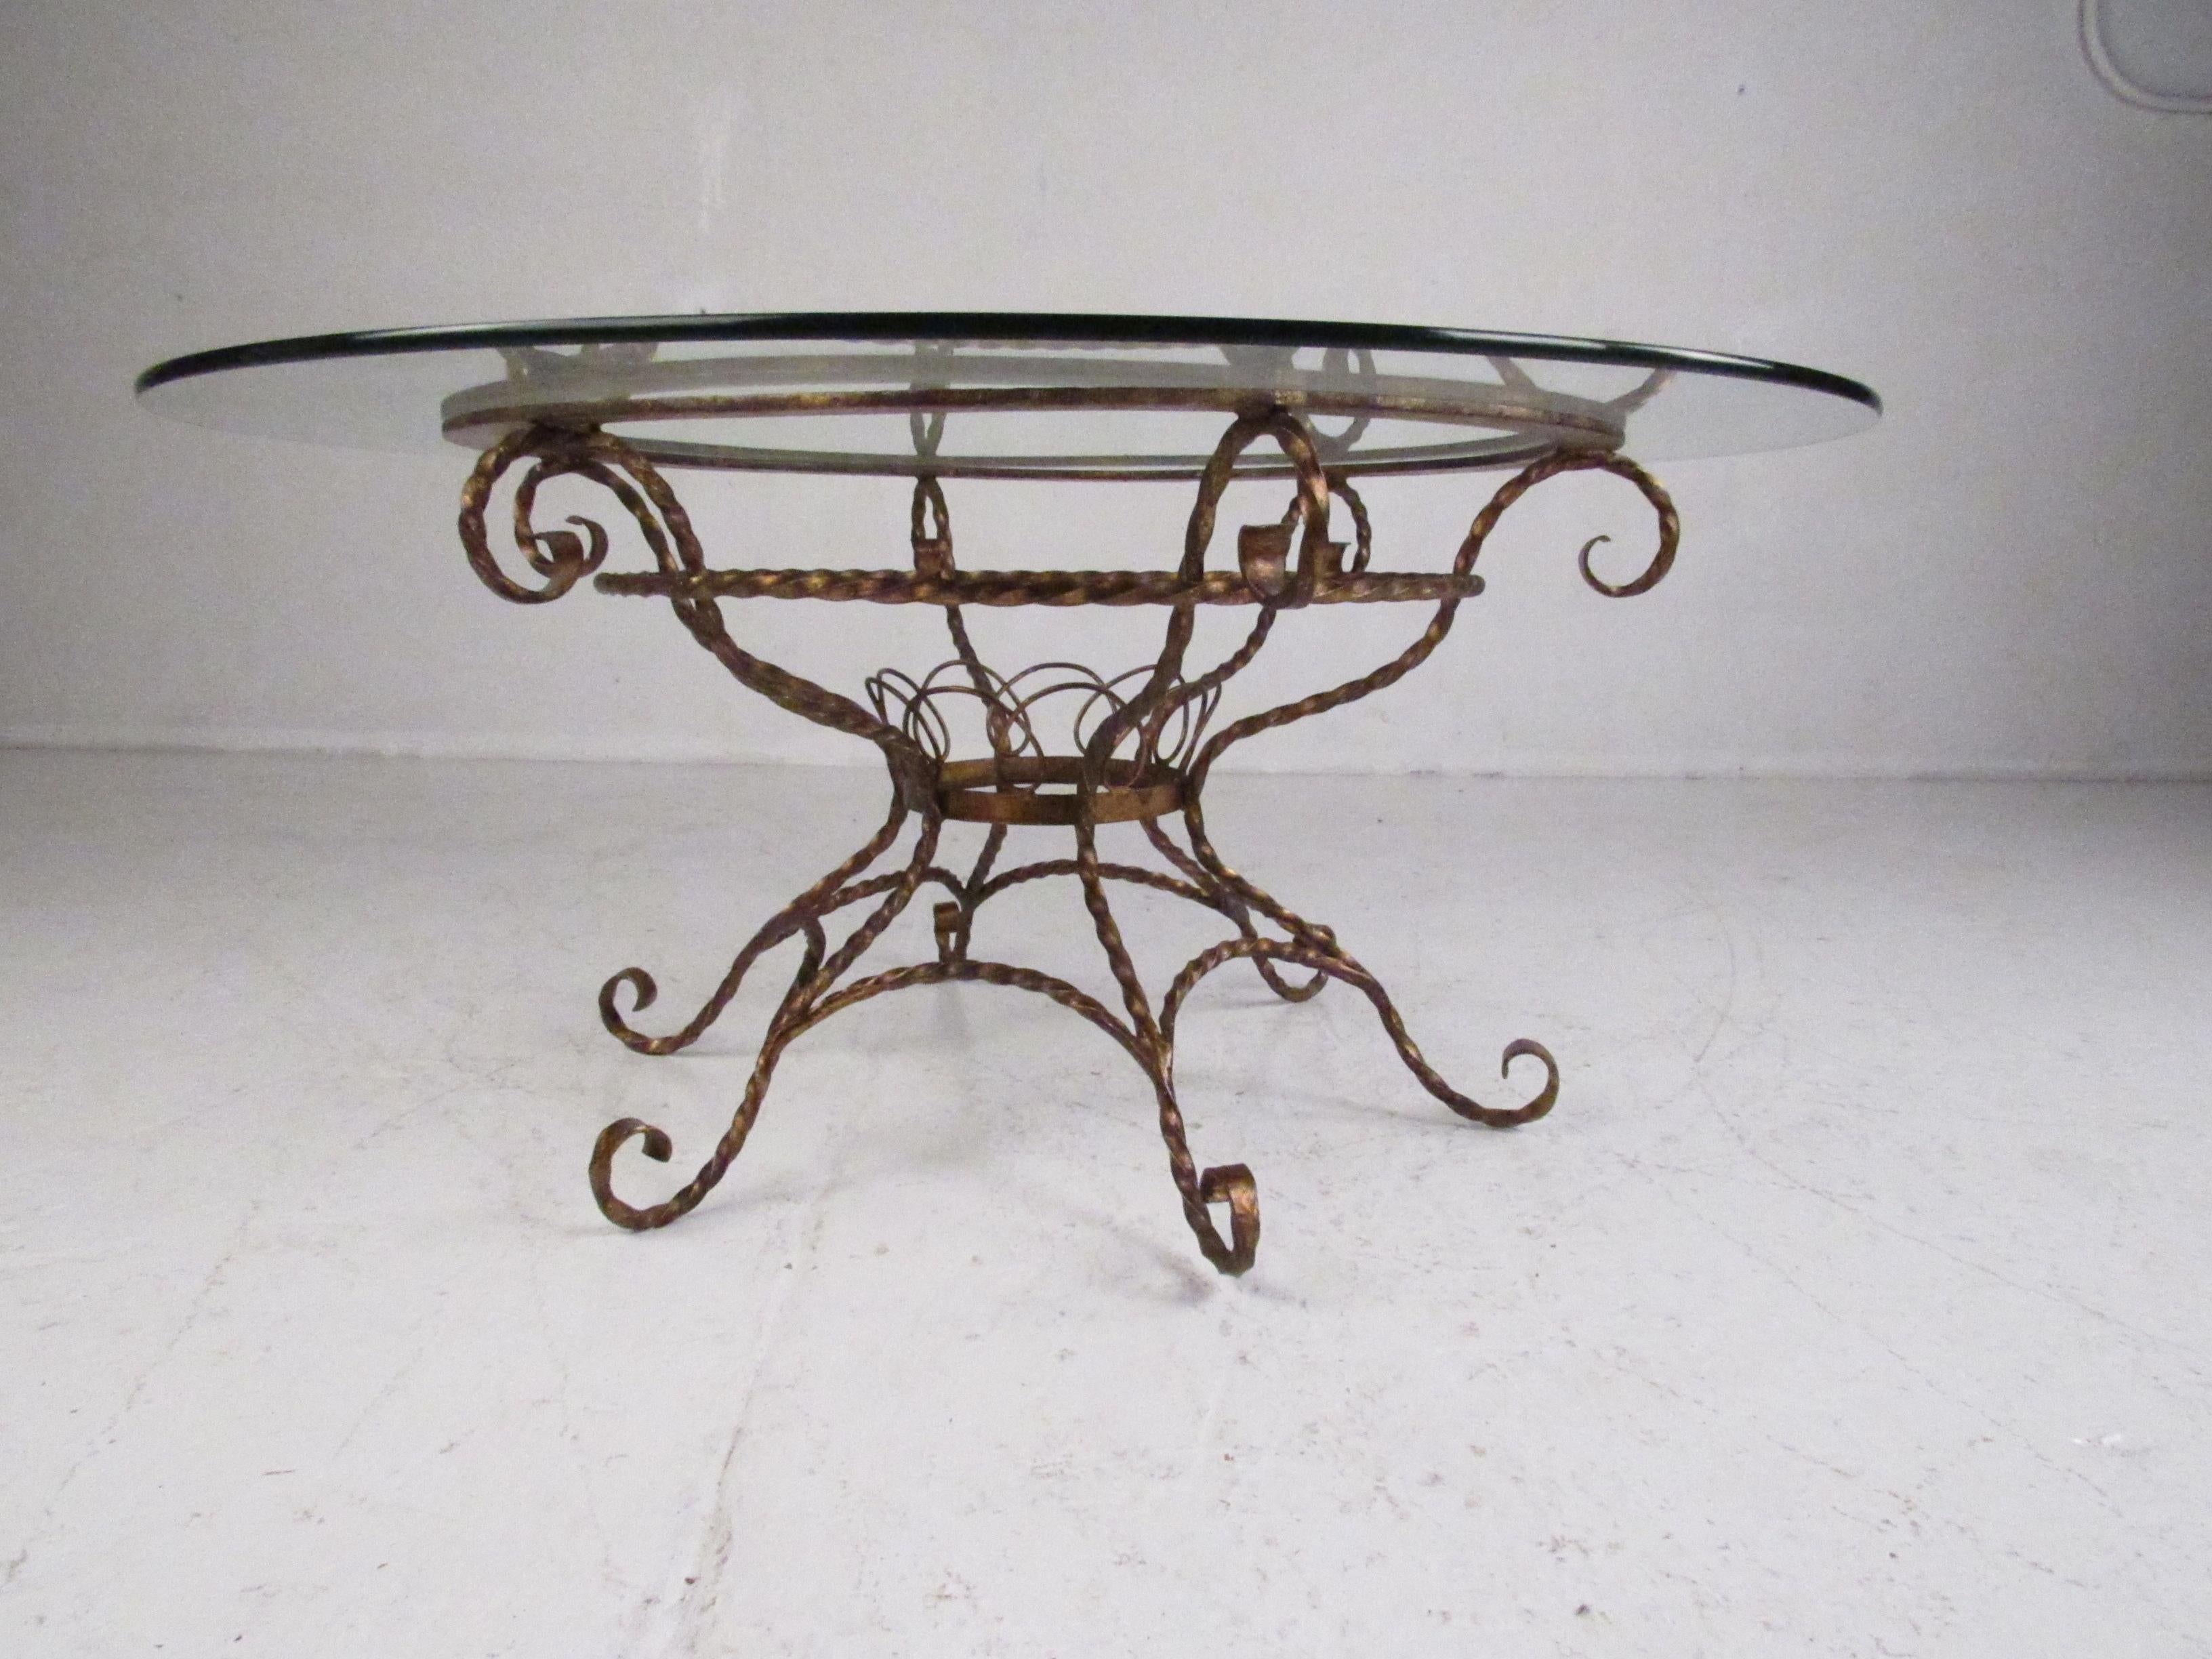 This stunning Mid-Century Modern coffee table features exquisite scroll detail and a lovely brass colored finish. A sleek design with a large circular glass top and splayed legs. A very unique and elaborate piece that is sure to make a lasting